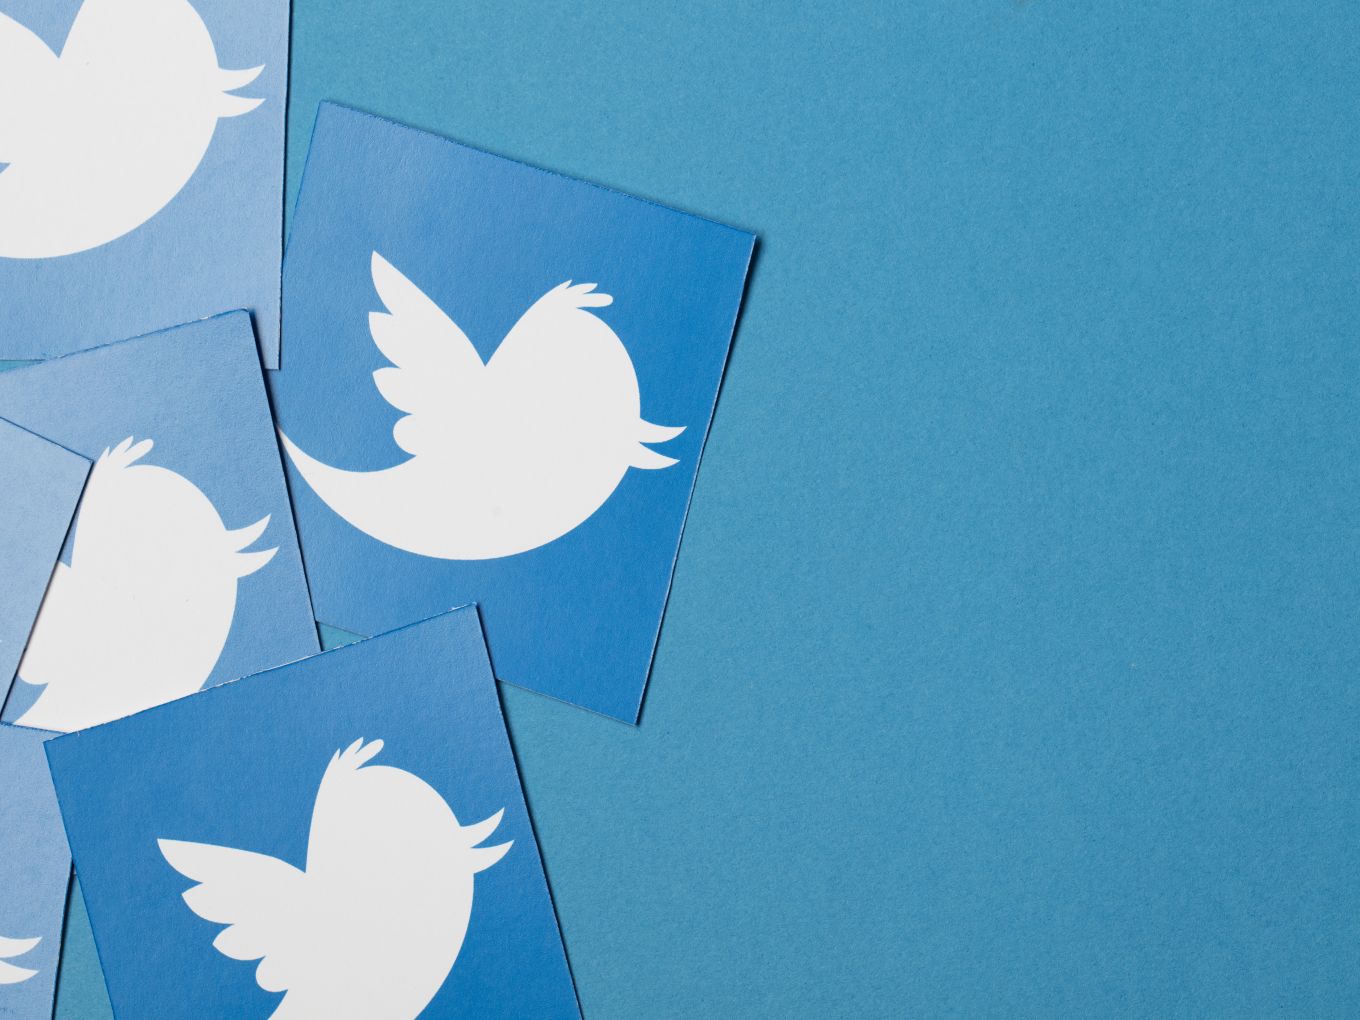 Twitter Experiments Wikipedia Like Feature To Curb Misinformation Posted By Politicians